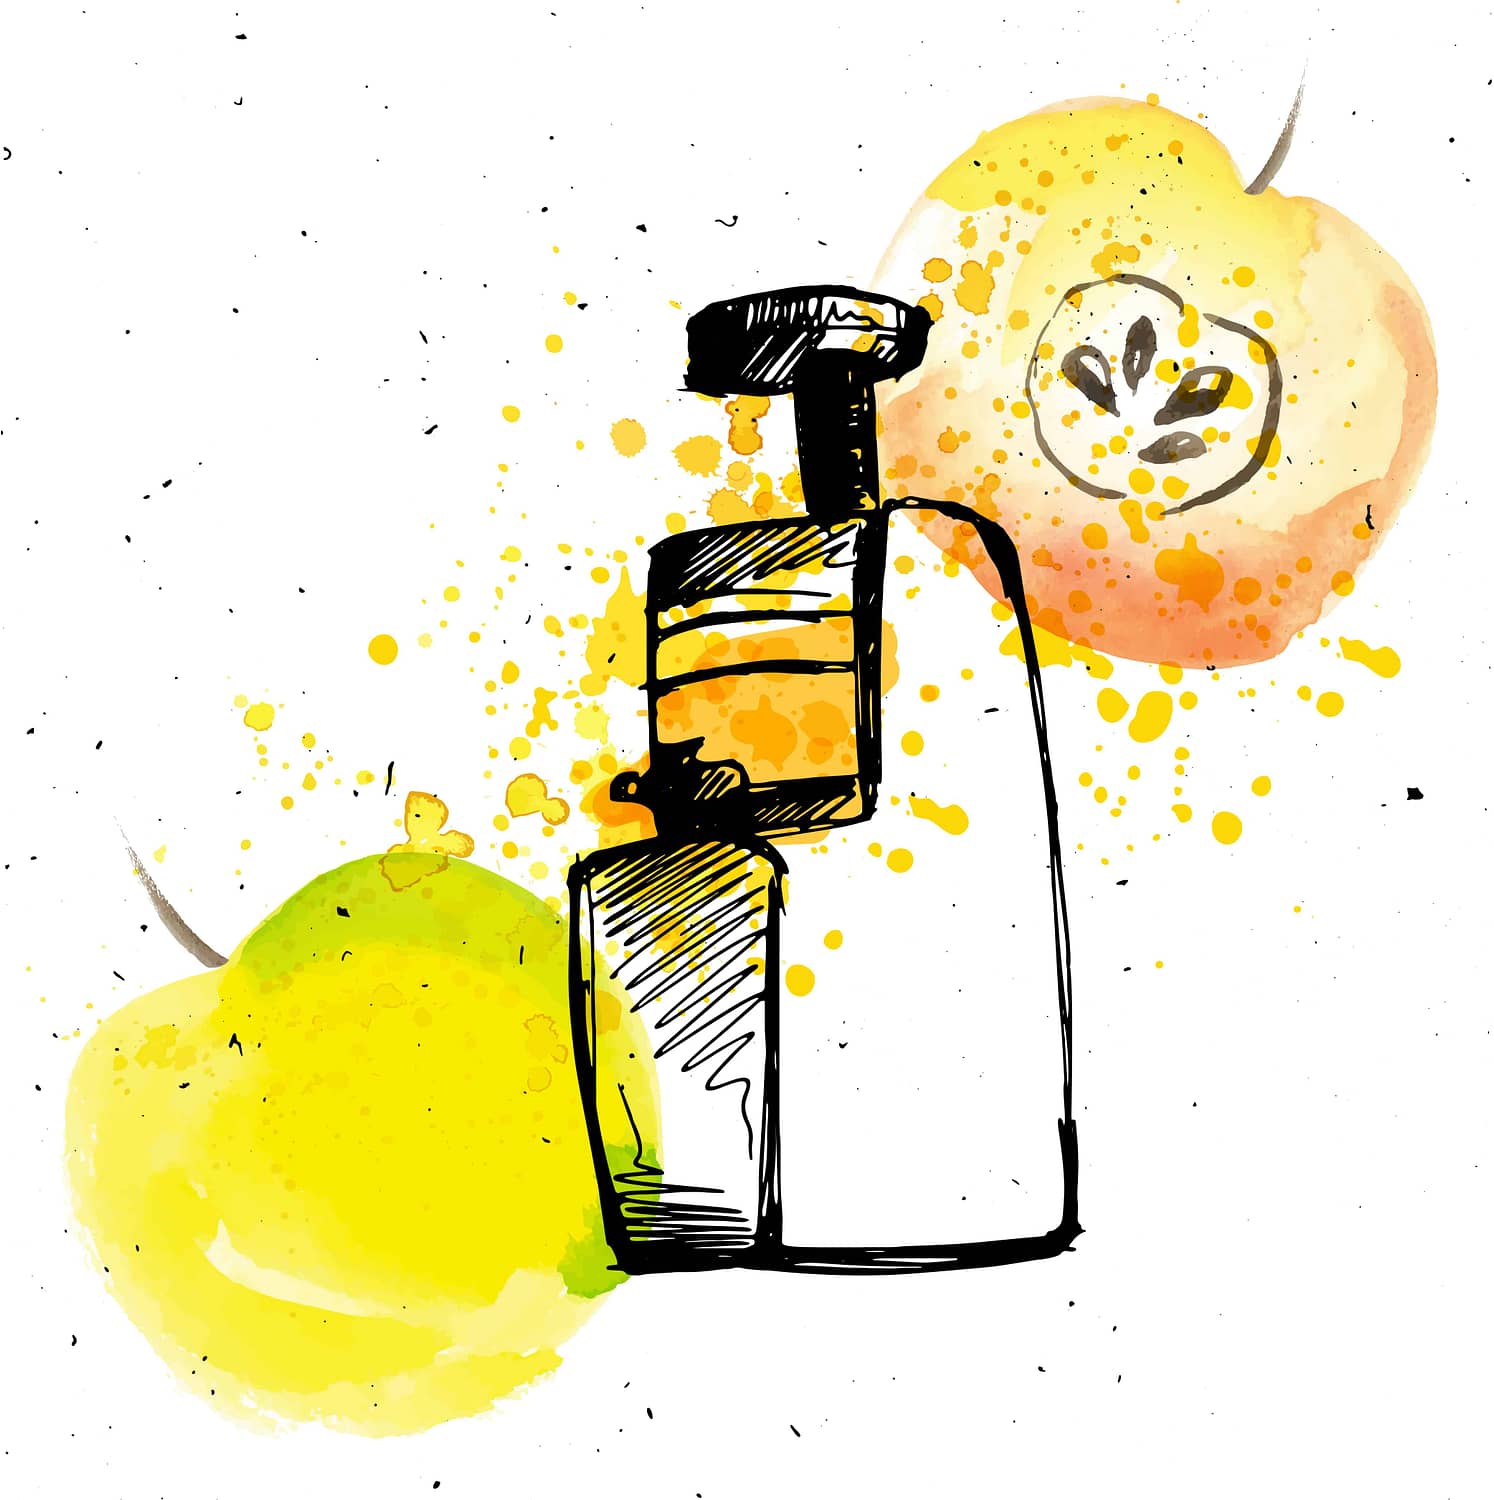 Masticating Juicer with apple. Apple juice with juicer and splashes, sketch hand draw illustration with watercolor elements